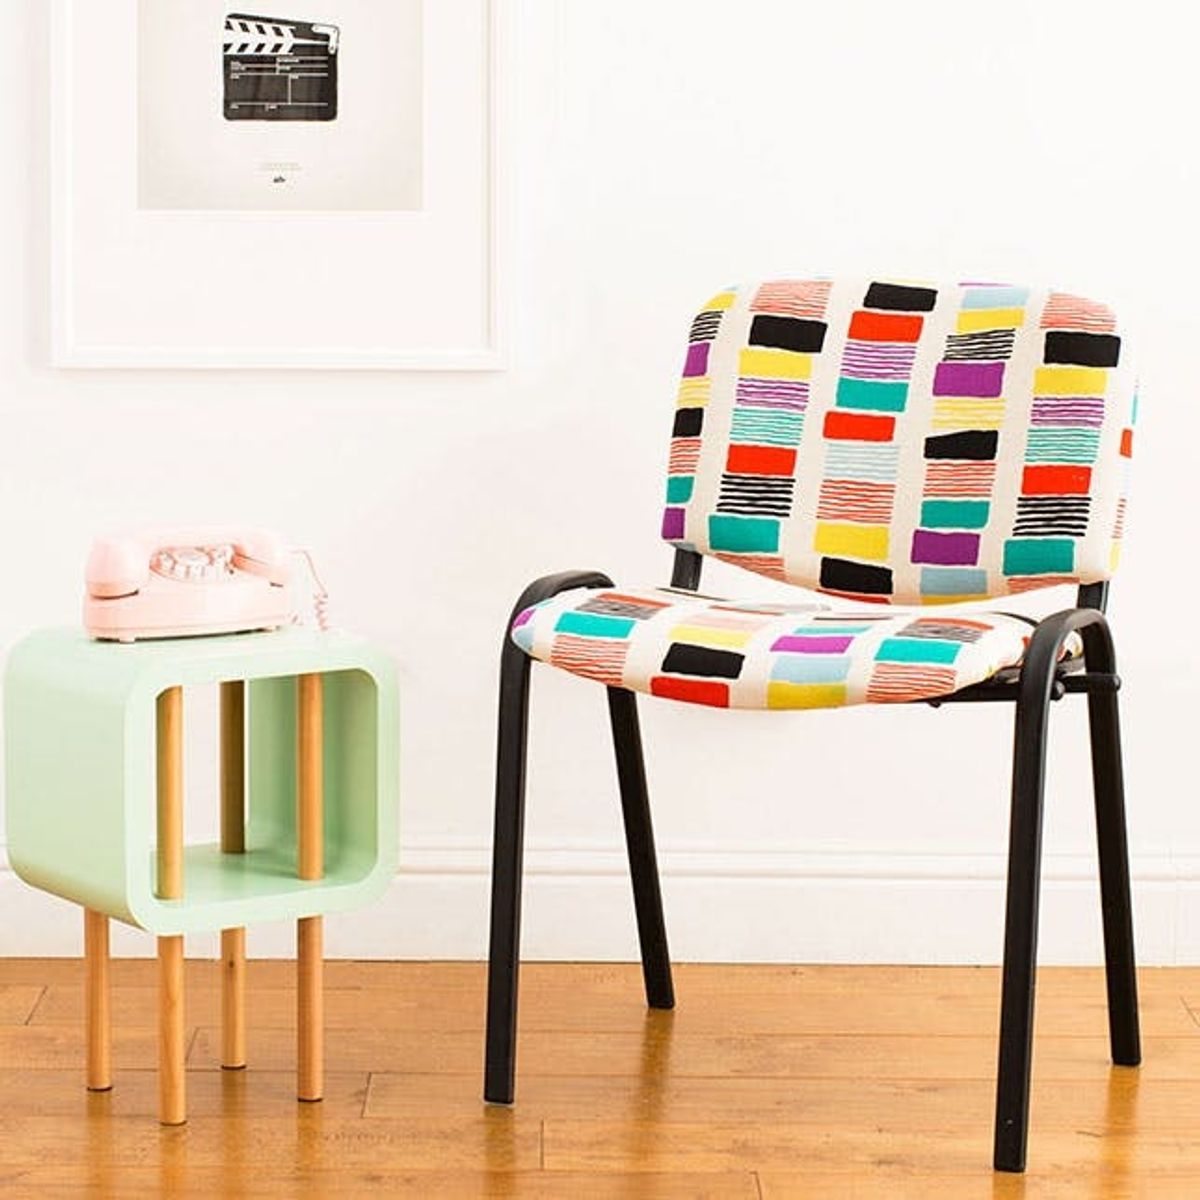 How to Reupholster a Thrift Store Chair in 4 Easy Steps